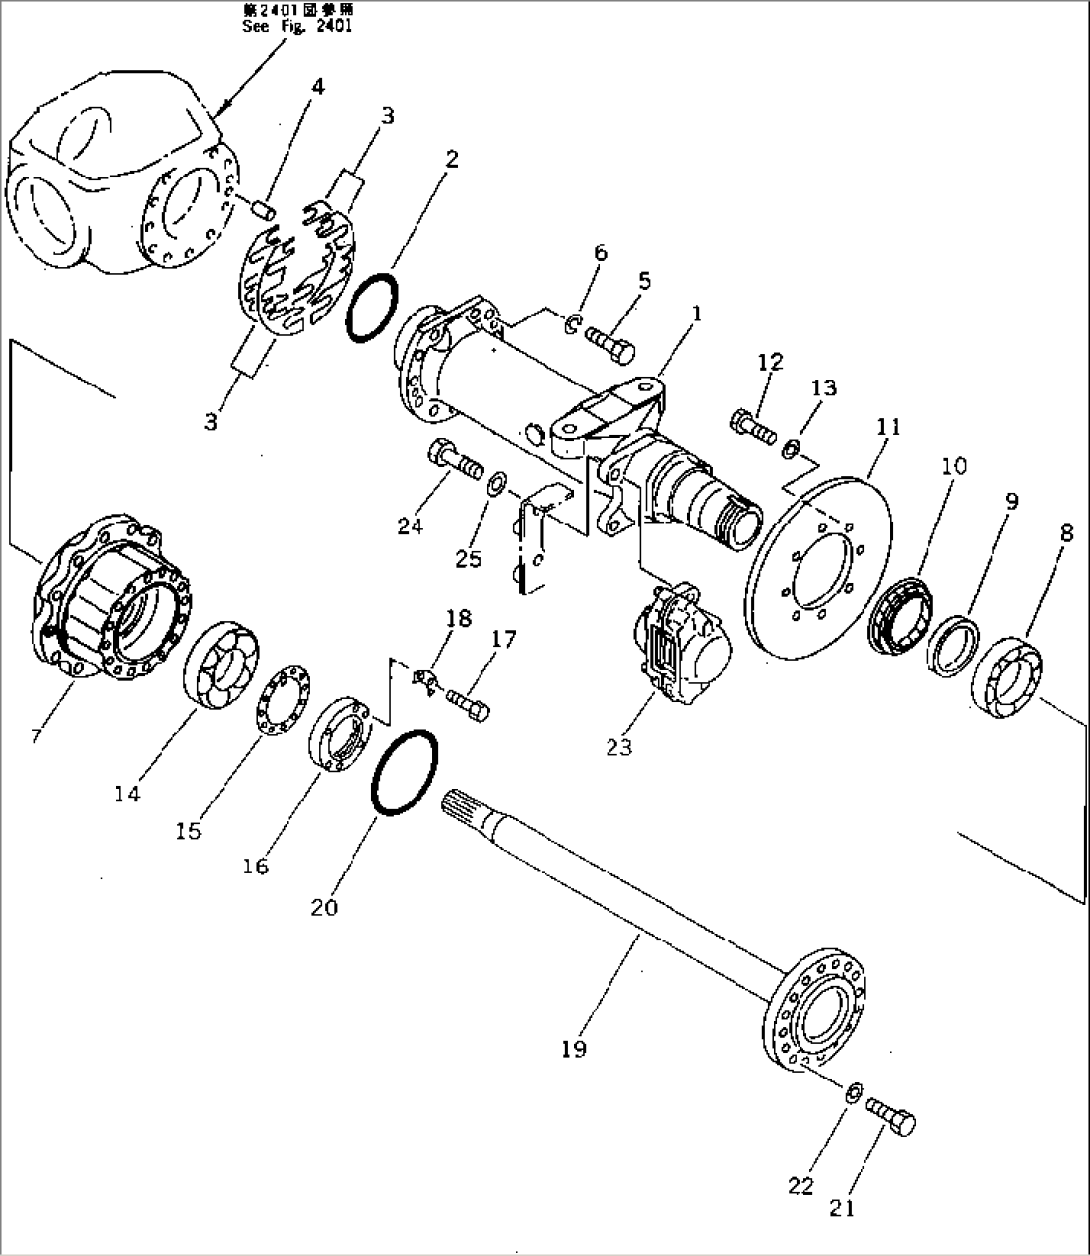 AXLE HOUSING (FRONT AND REAR)(#1001-1602)